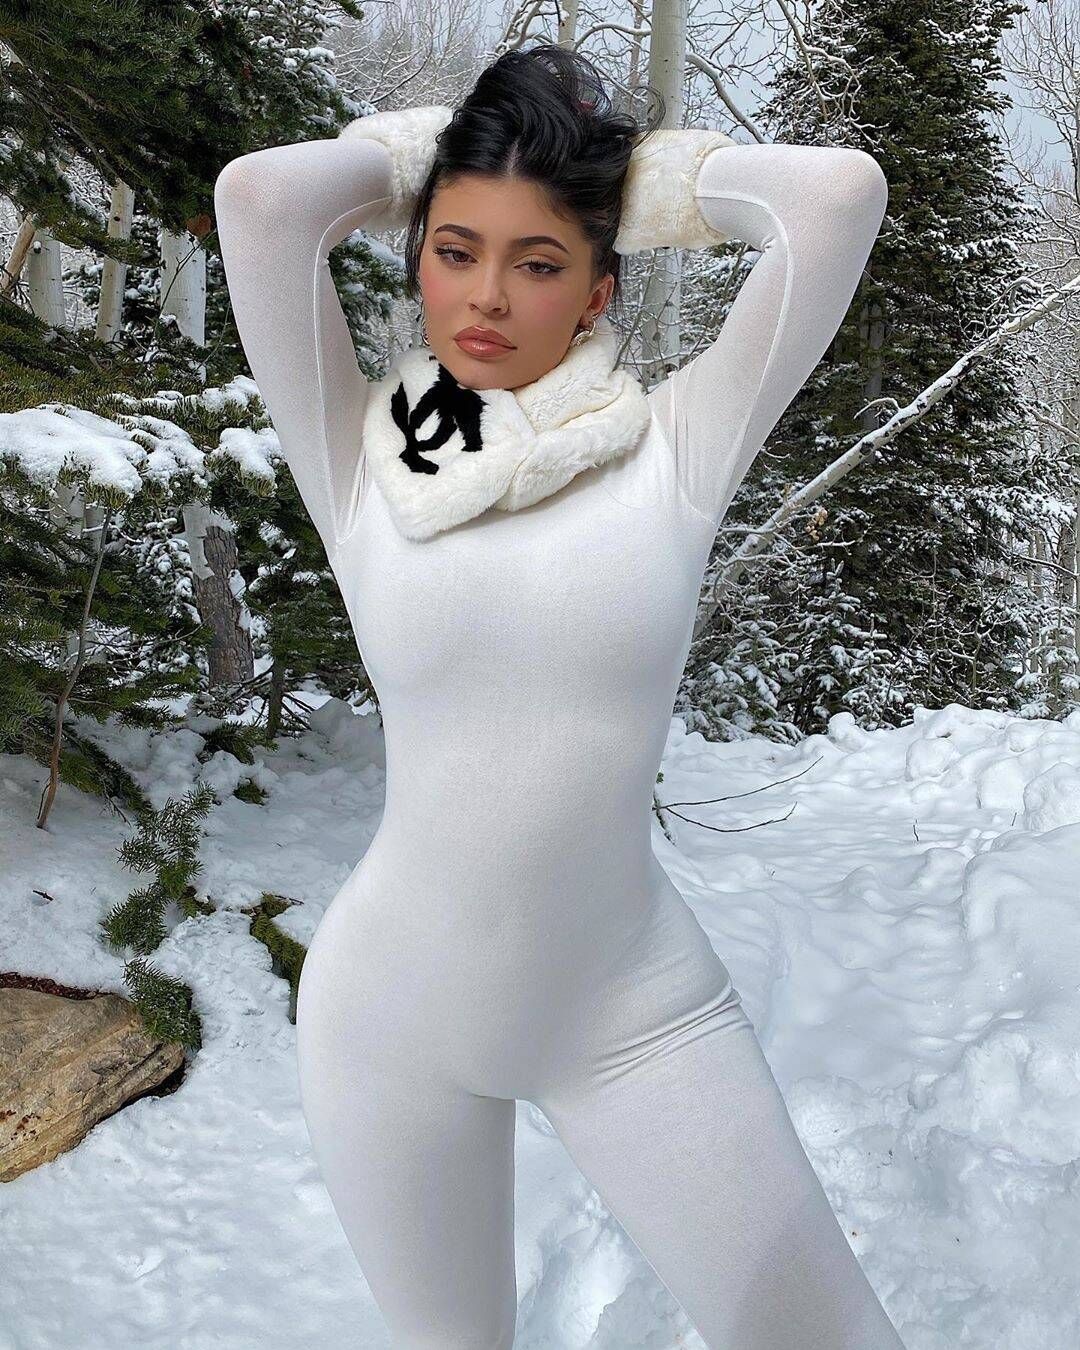 Kylie Jenner in snow